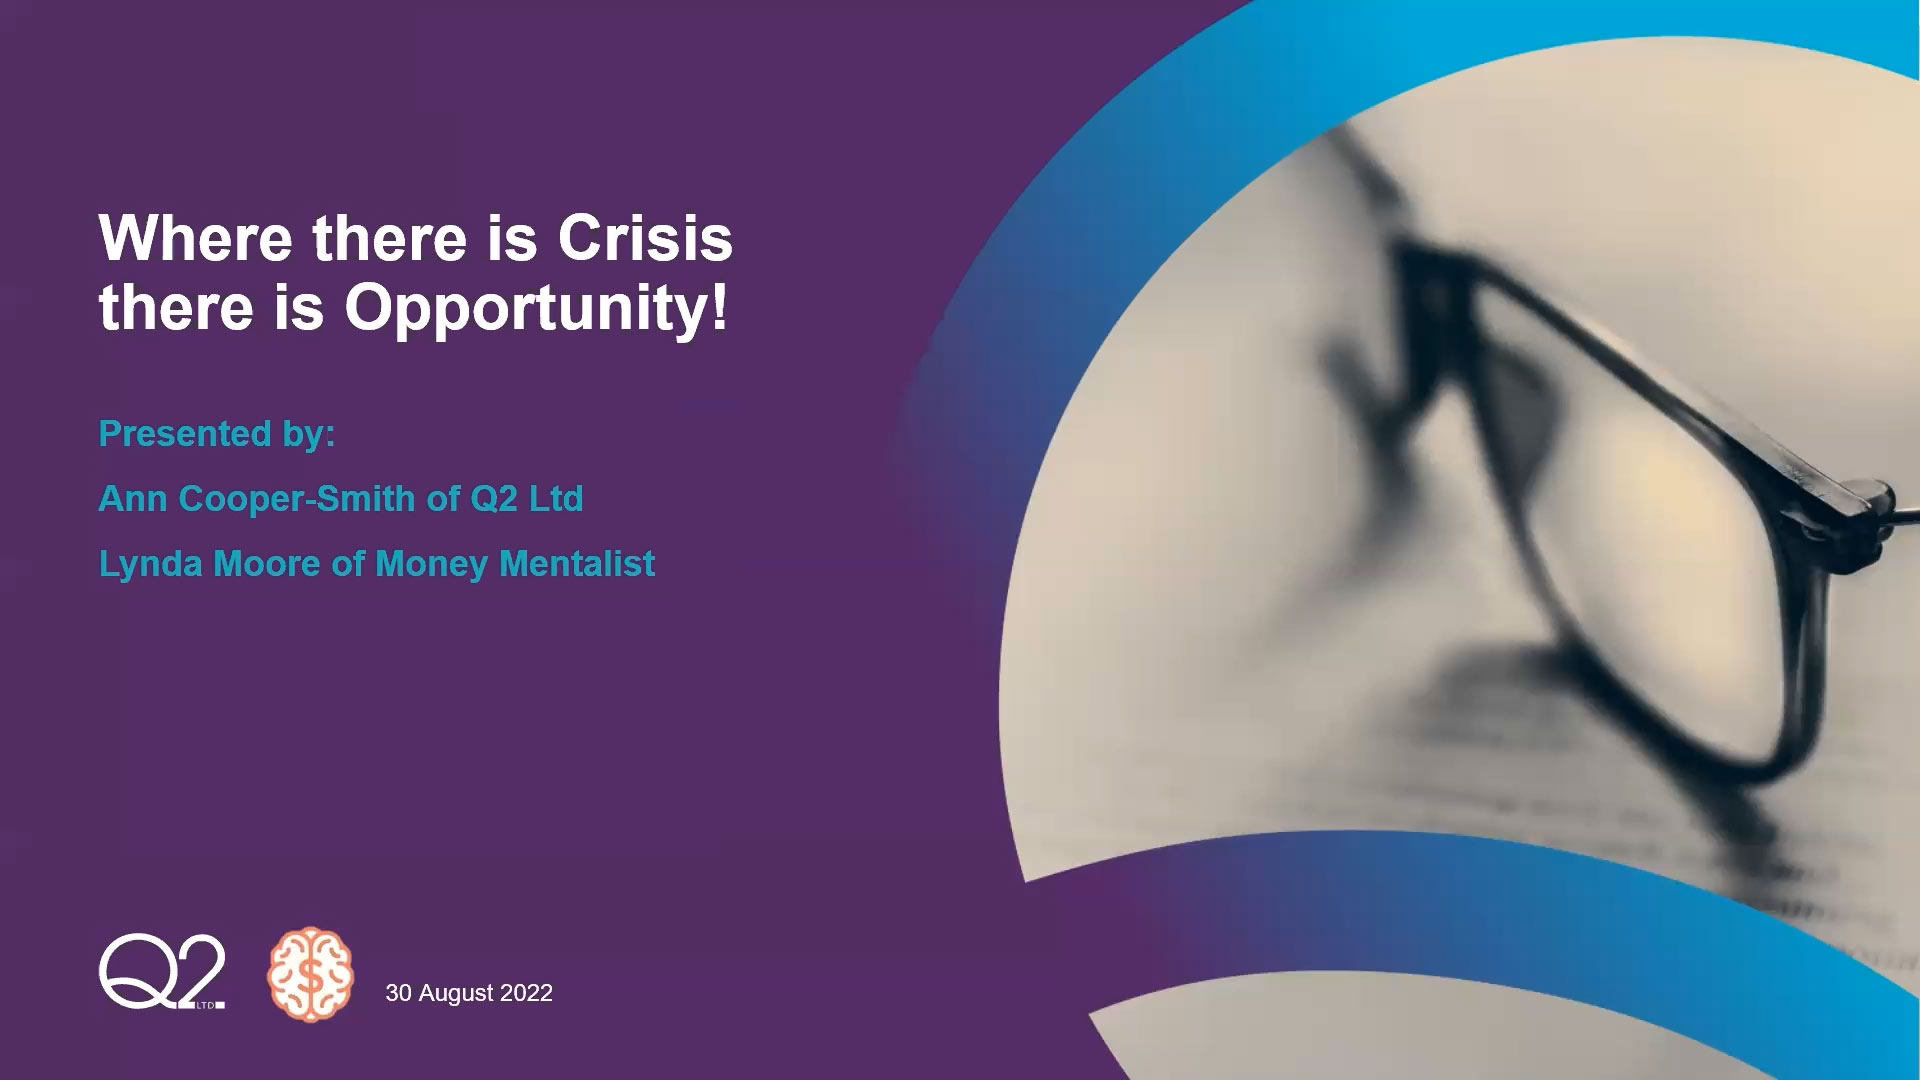 Where there is Crisis, there is Opportunity!